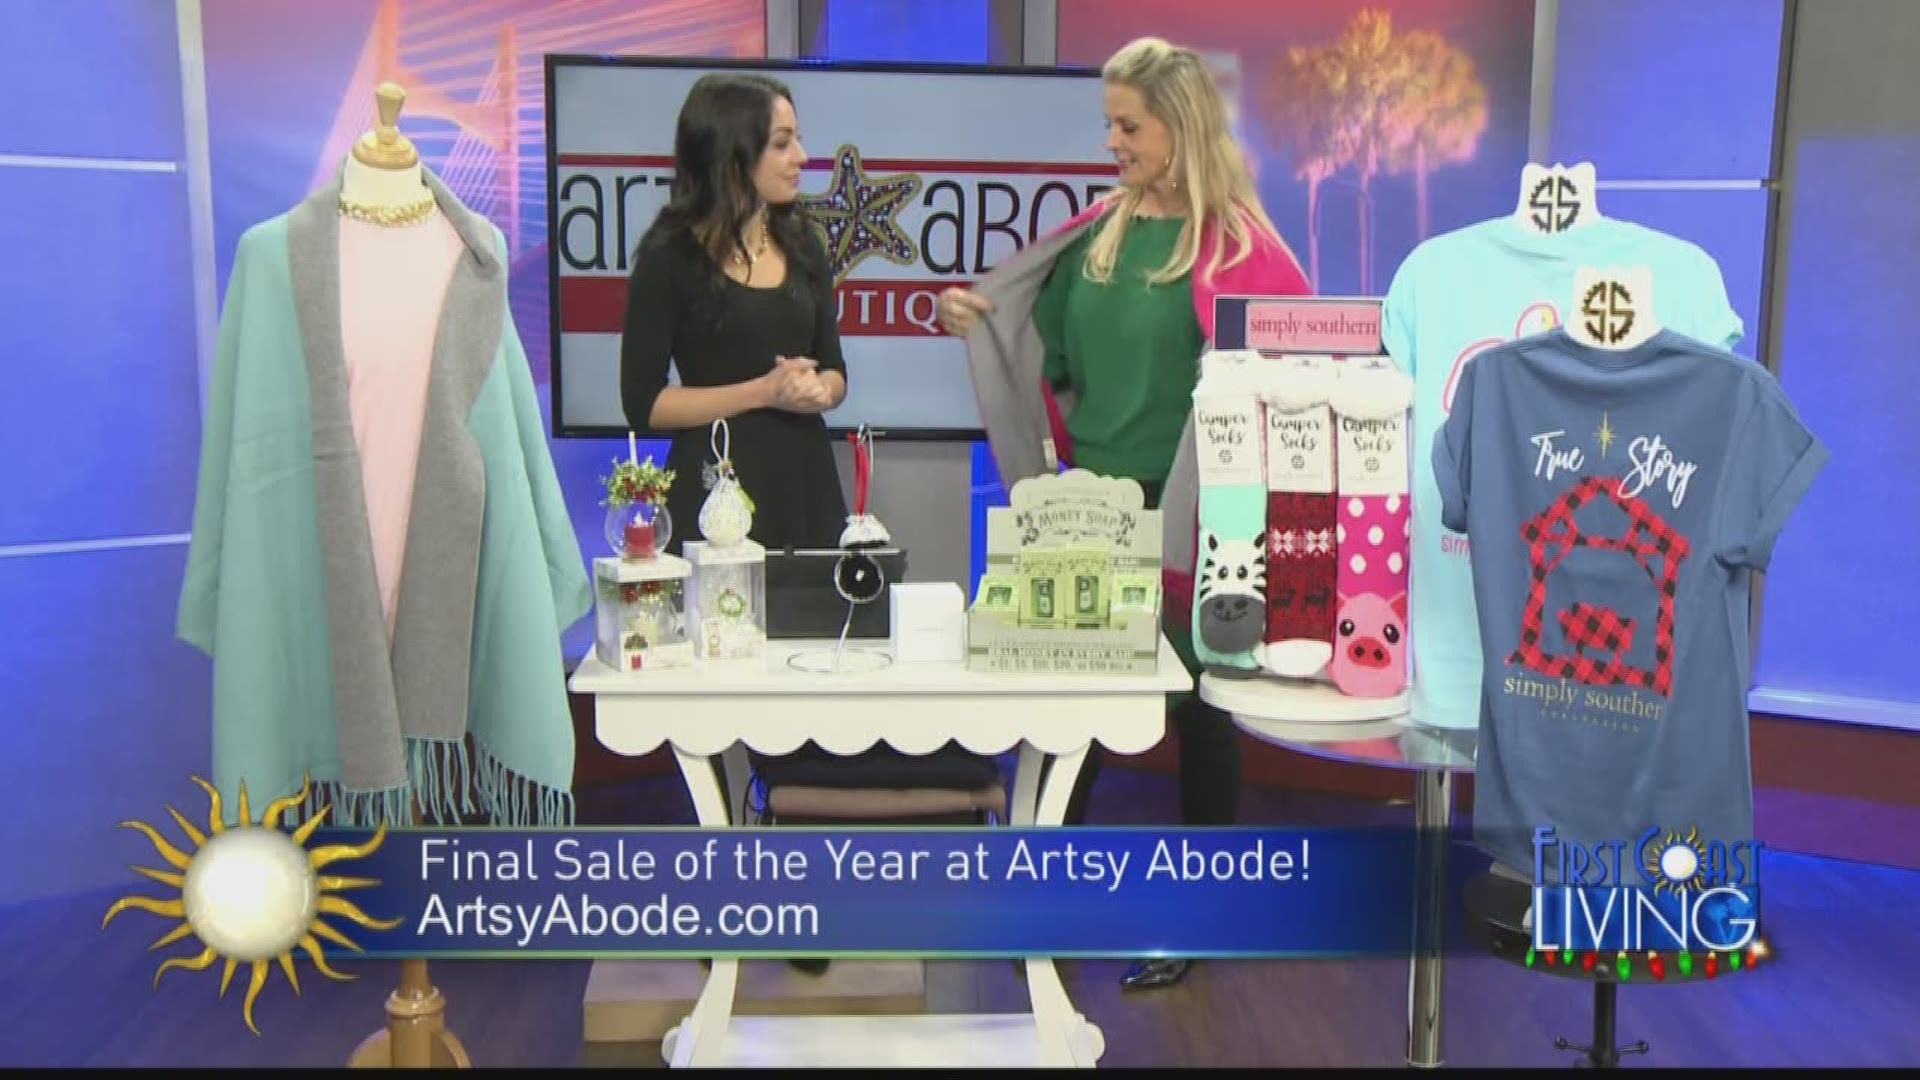 We all love a good deal, so check out Artsy Abode for your holiday gifts.